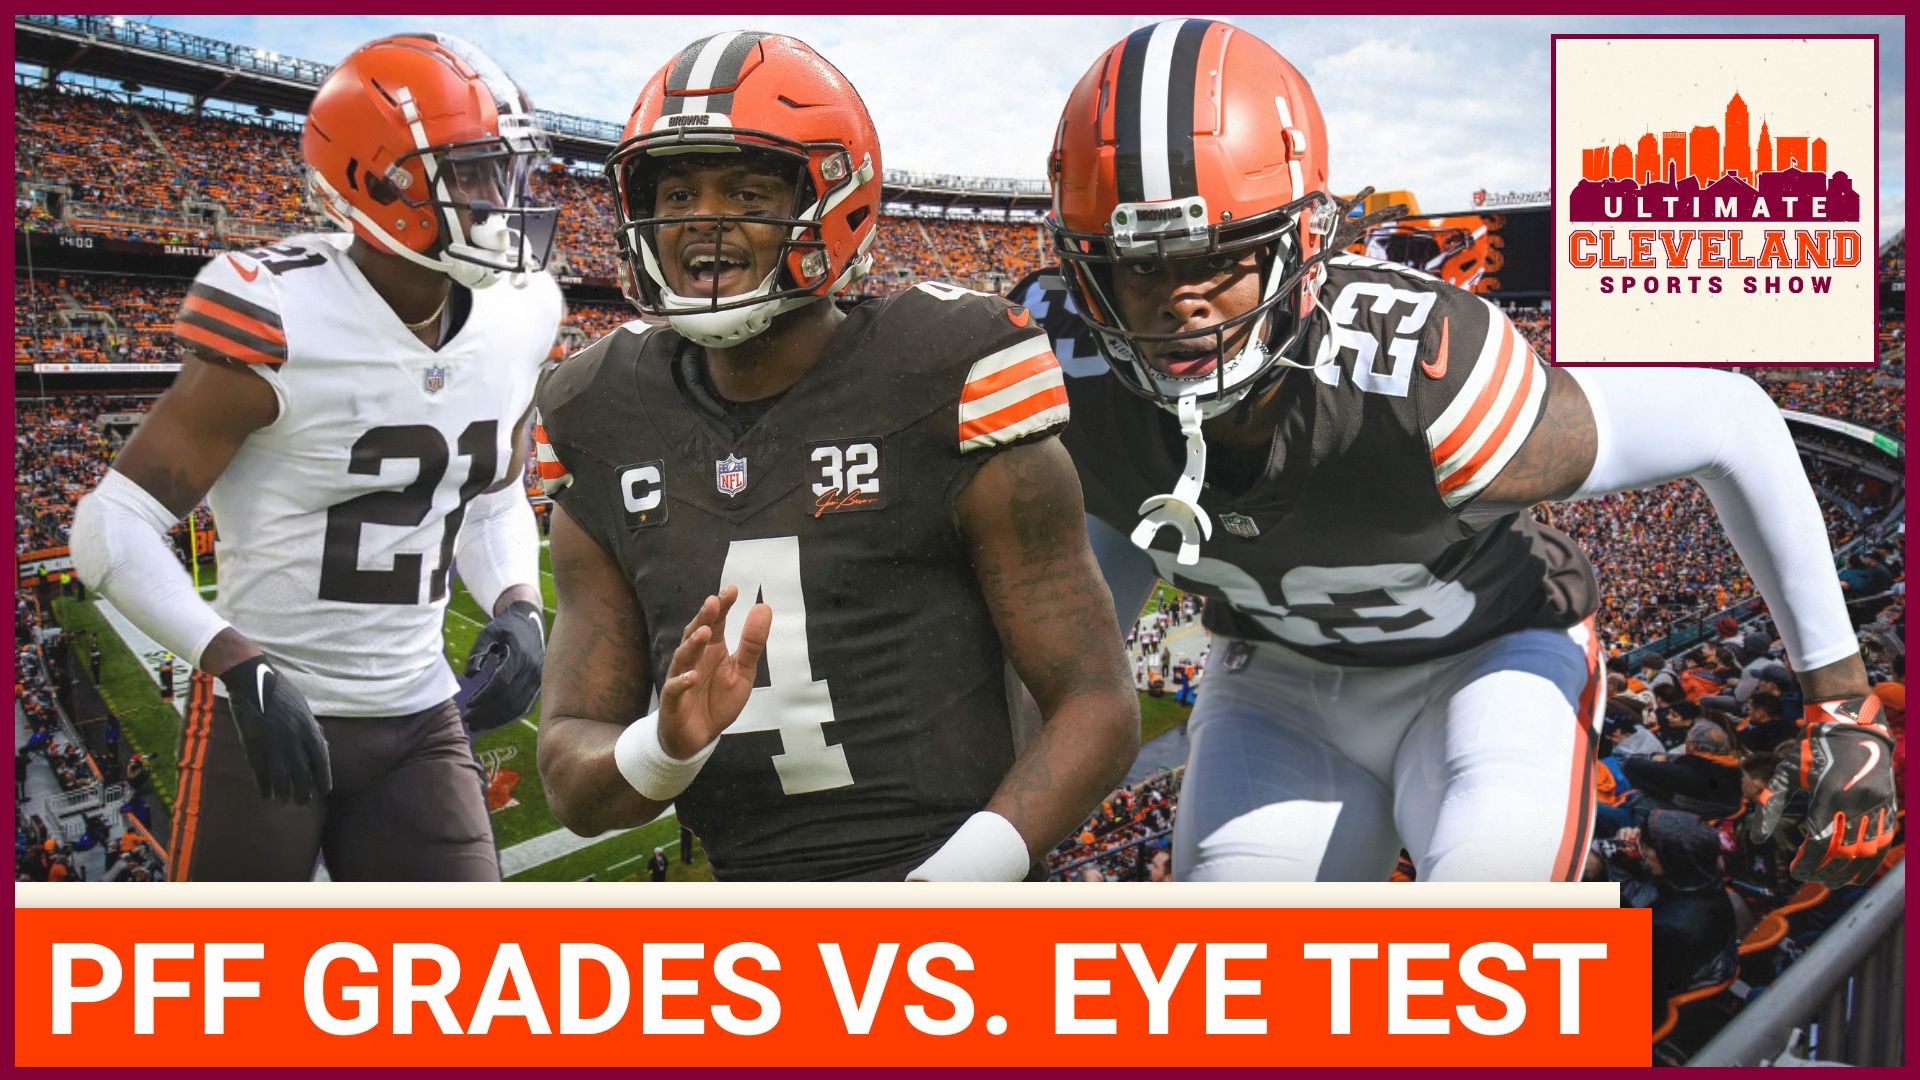 PFF grades for Cleveland Browns players after their performance against the  Bengals released